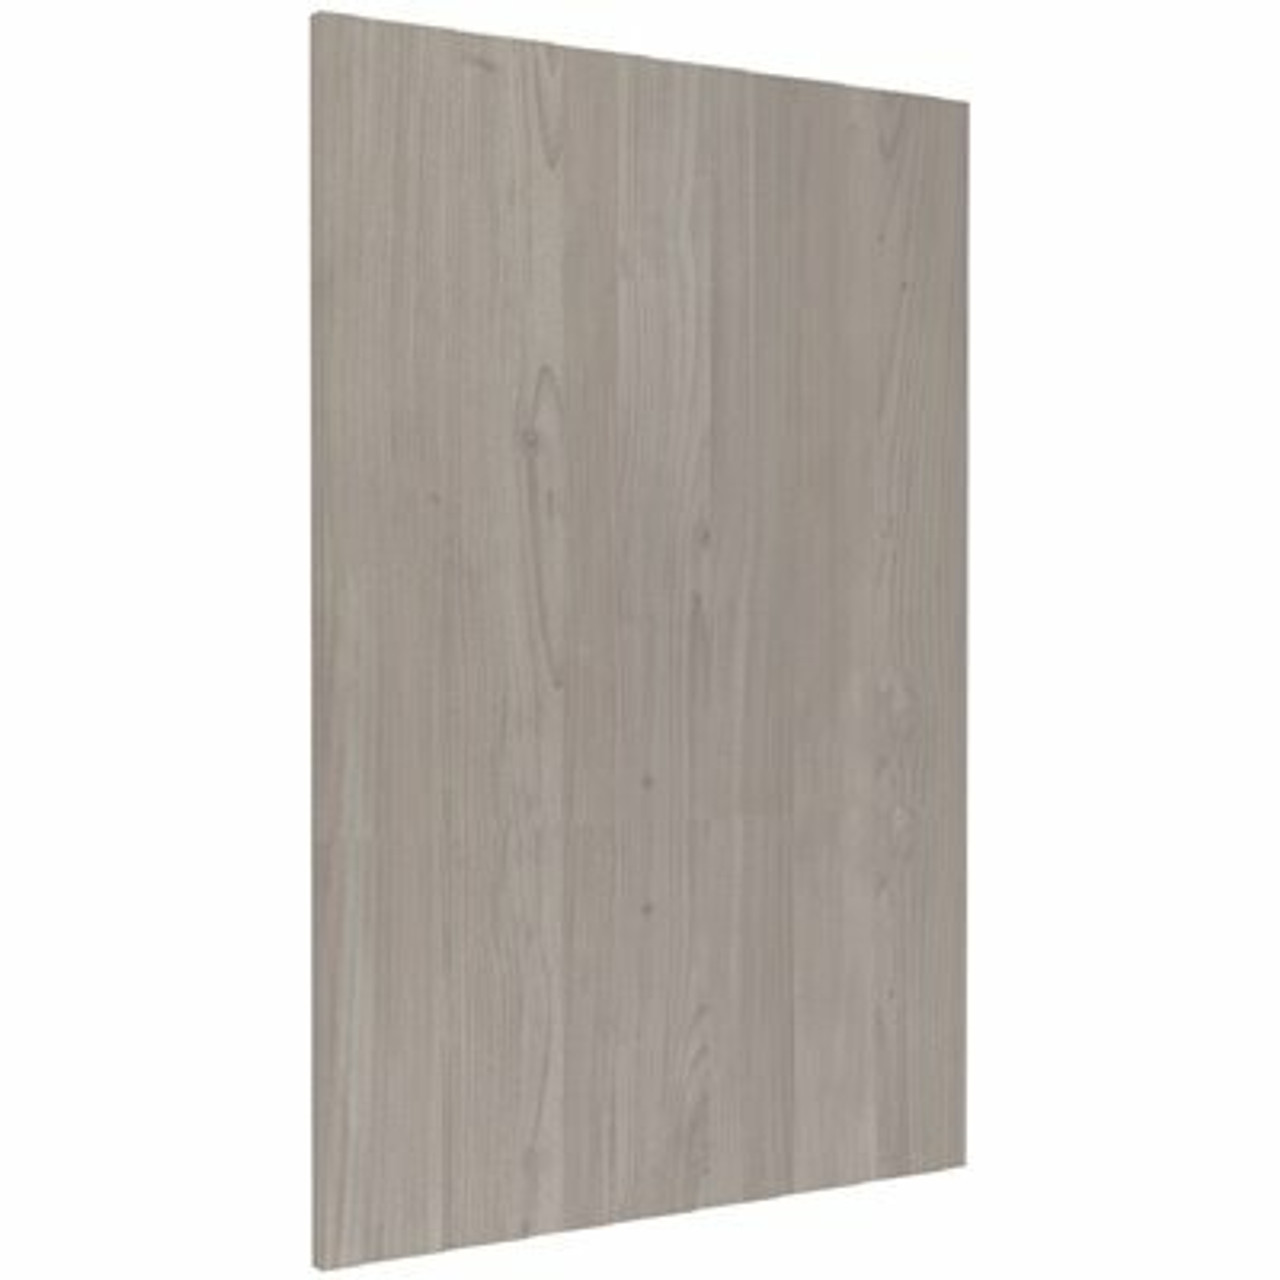 Cambridge Standard 36 In. X 48 In. X 1 In. Decorative End Panel For Island Cabinet In Grey Nordic